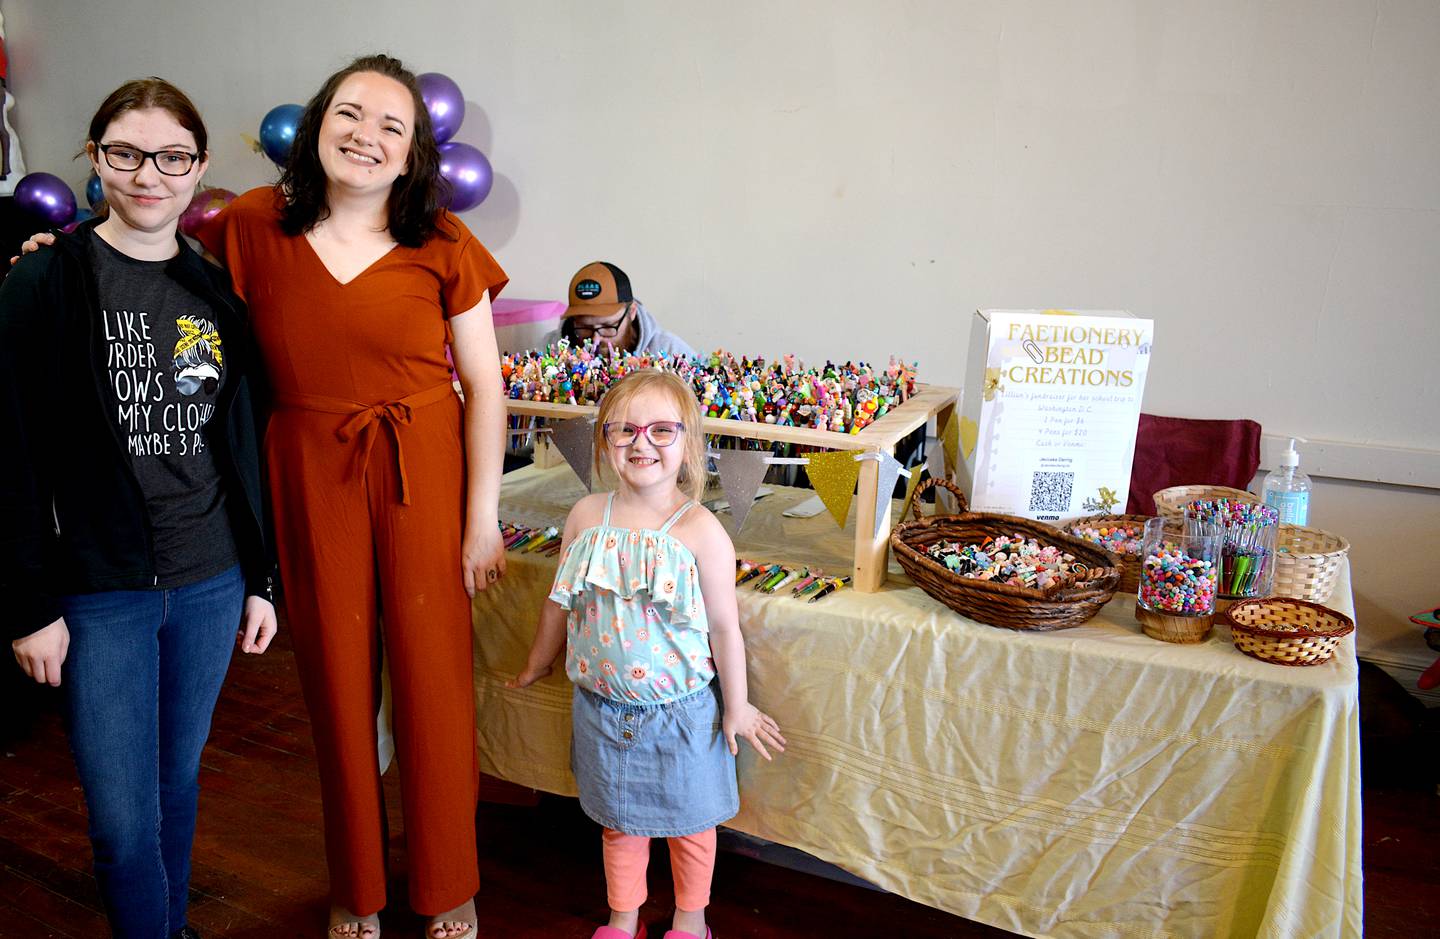 Lillian, Jecceka and Loghan Derrig with Faetionary Bead Creations were one of the vendors present in the hospitality center, selling hand-crafted custom writing pens.